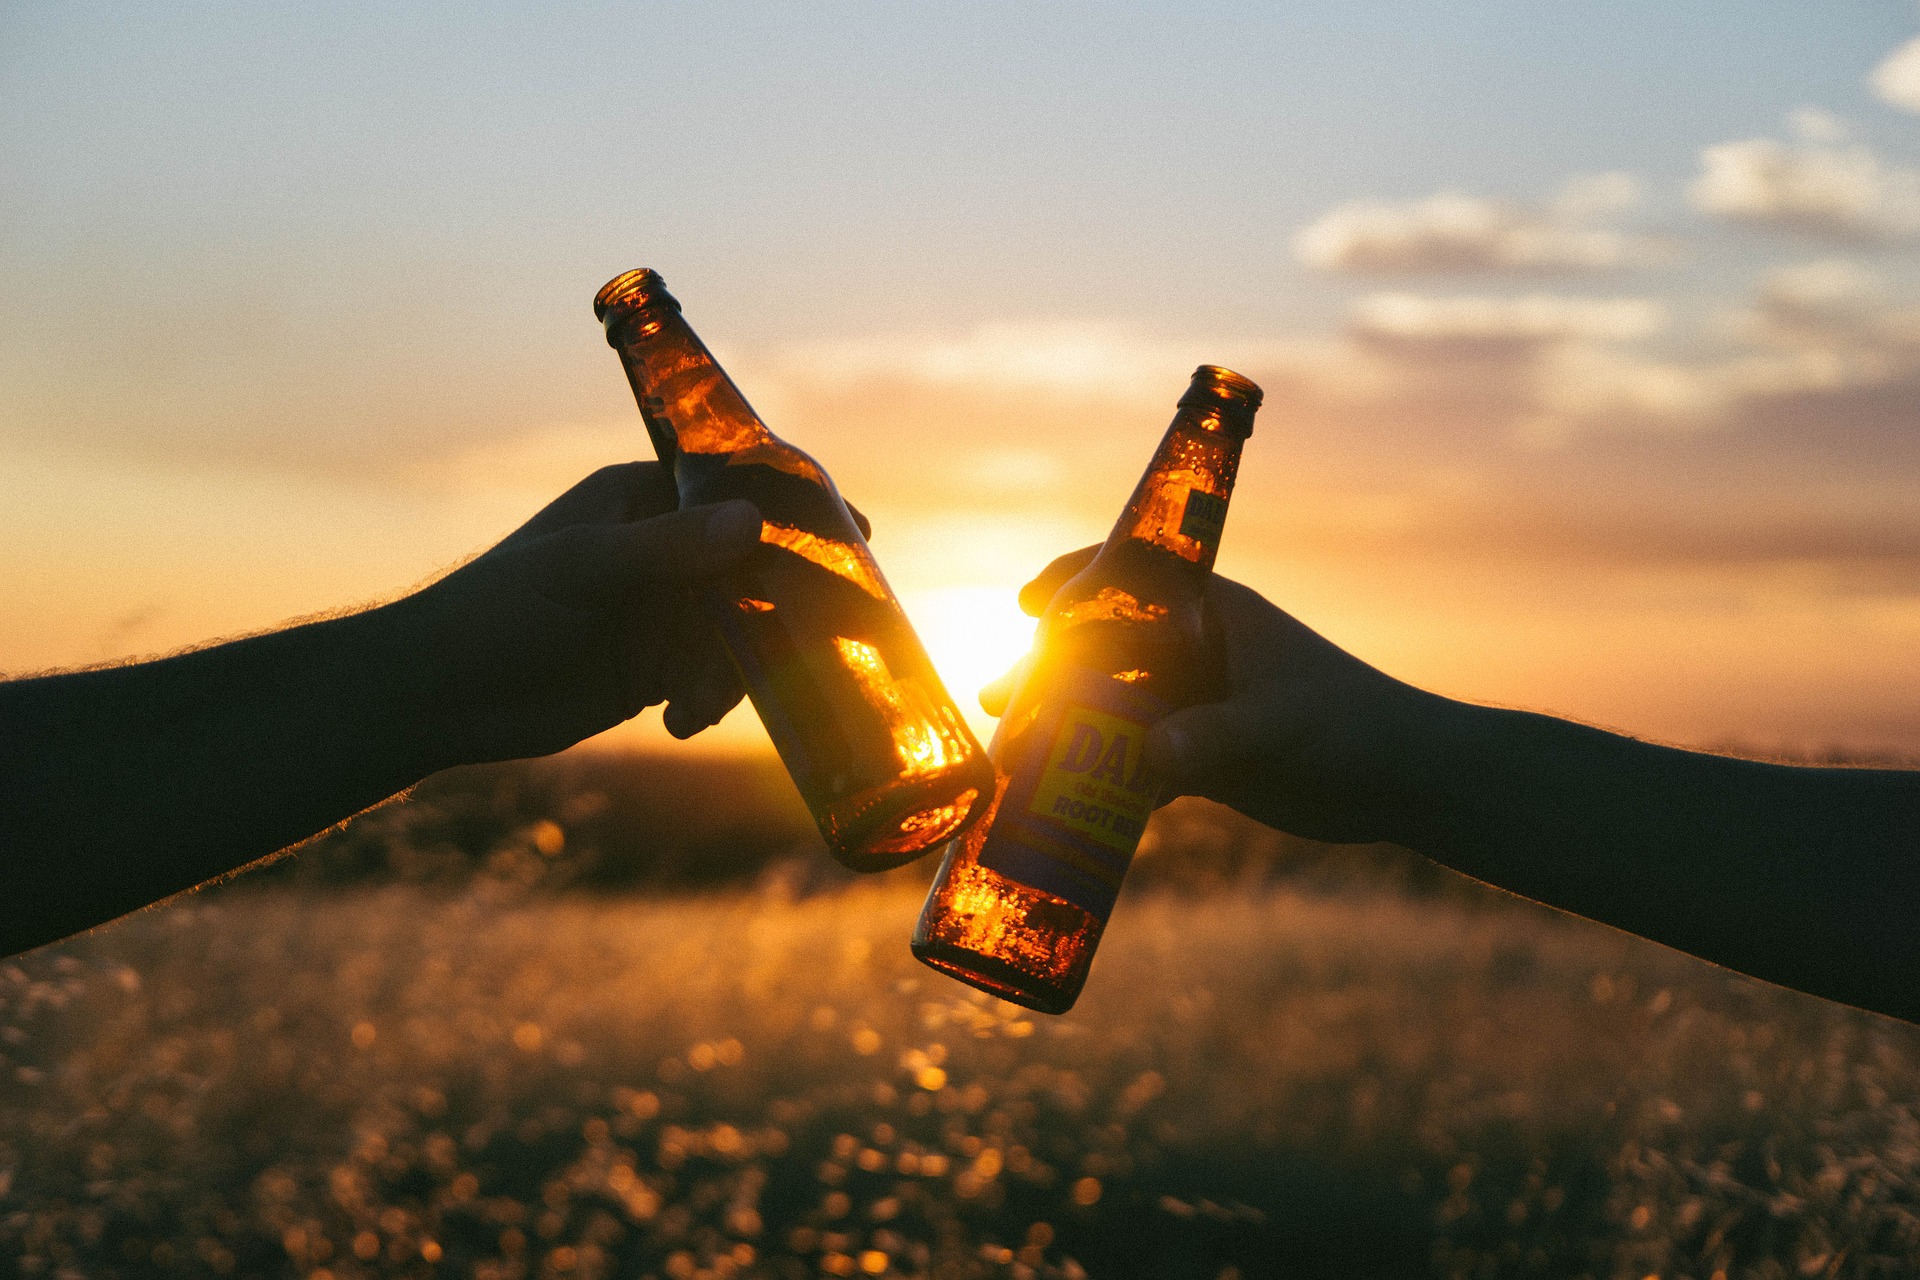 Thai Beverage Public Company Limited Joins In The Race To Capture Vietnam’s Beer Market